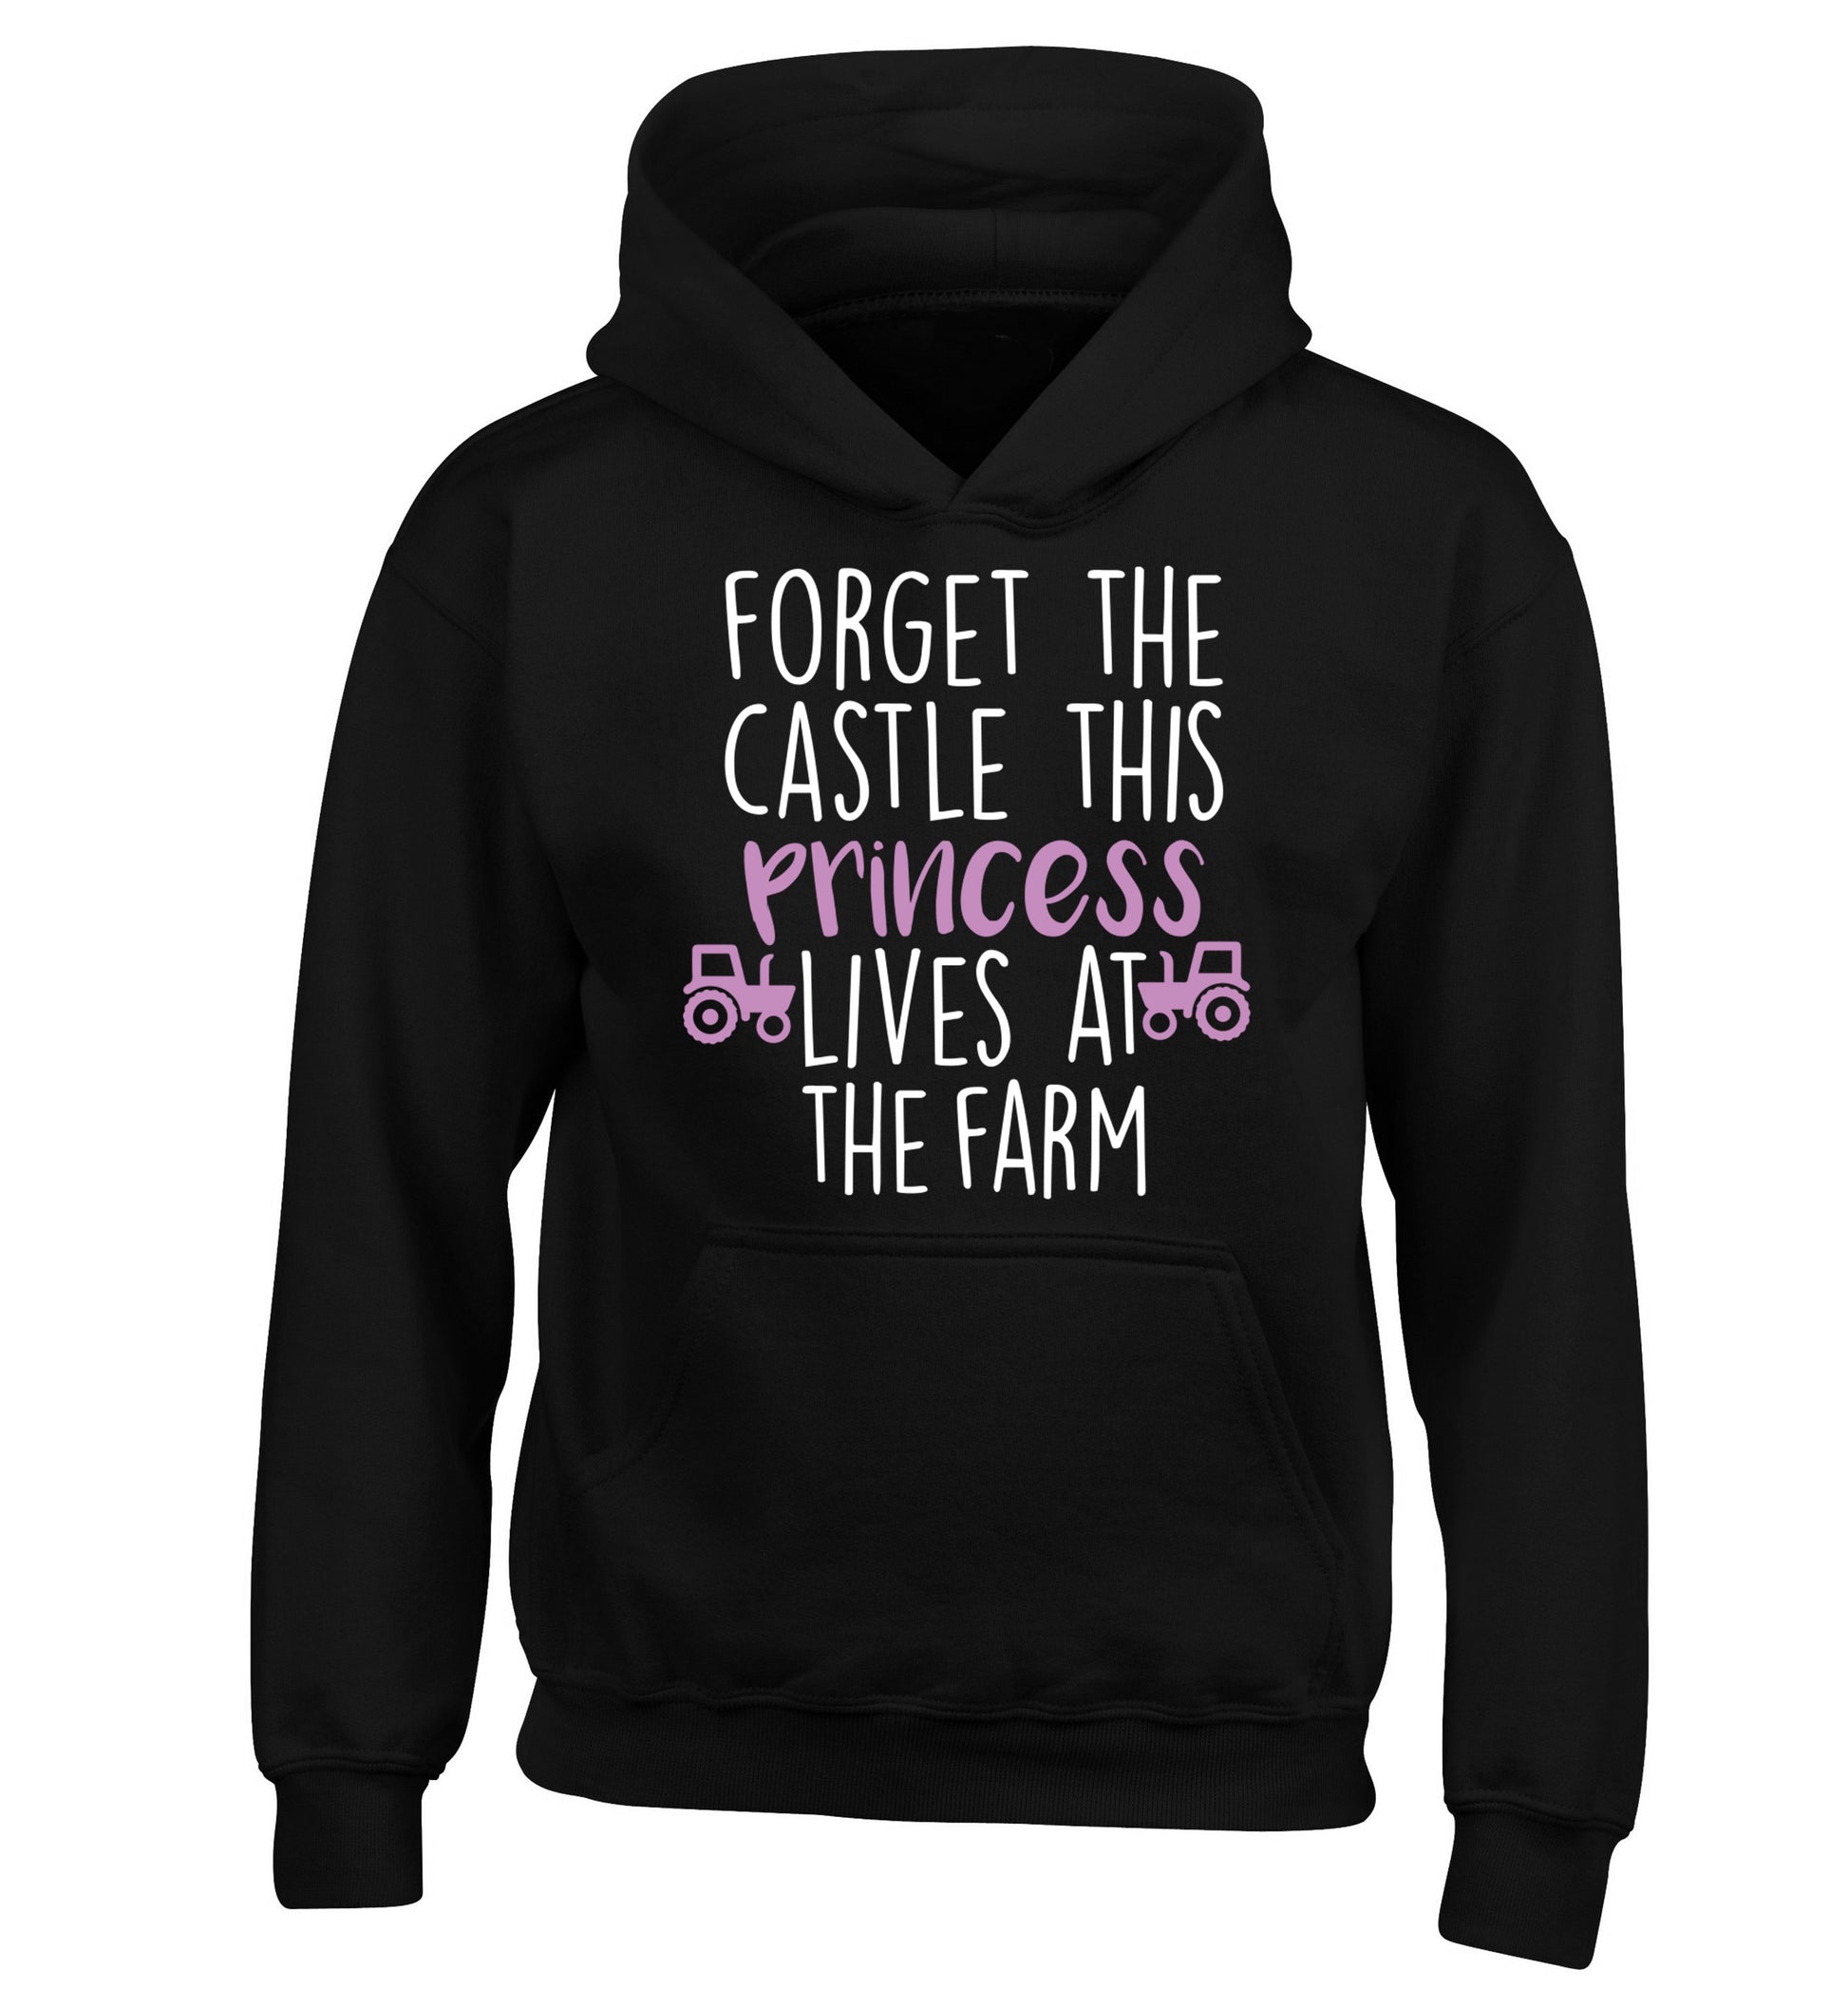 Forget the castle this princess lives at the farm children's black hoodie 12-14 Years